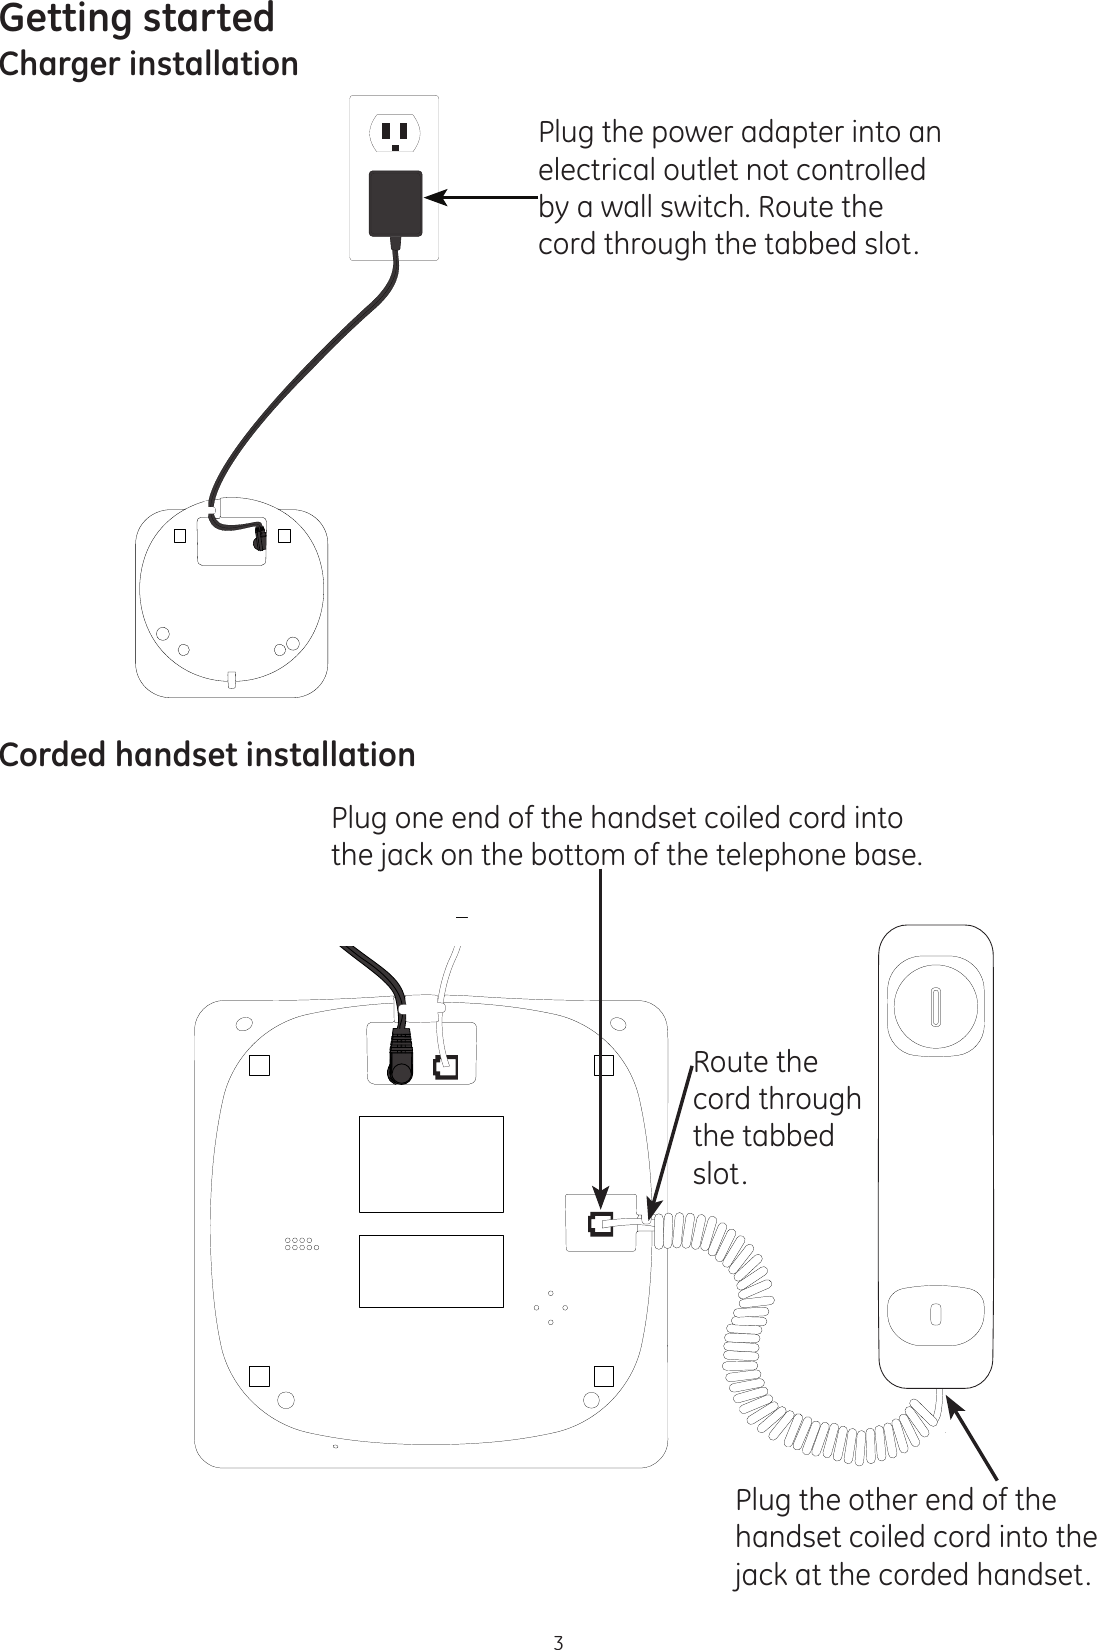 Getting started3Plug one end of the handset coiled cord into the jack on the bottom of the telephone base.Plug the other end of the handset coiled cord into the jack at the corded handset.Charger installationCorded handset installationPlug the power adapter into an electrical outlet not controlled by a wall switch. Route the cord through the tabbed slot.Route the cord through the tabbed slot.